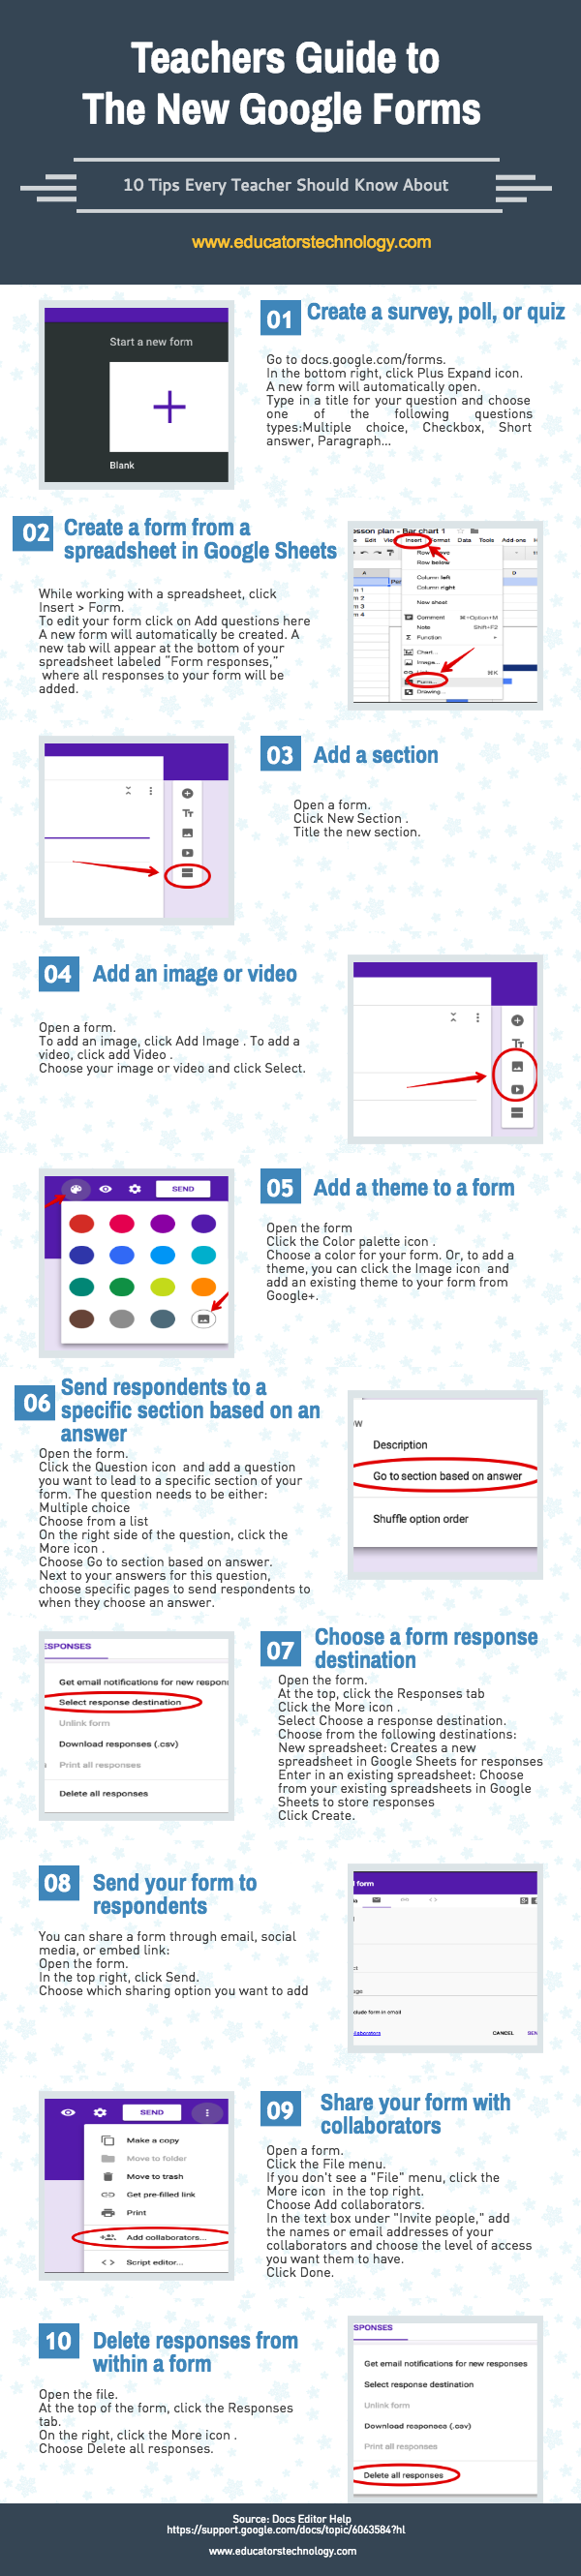 new google forms tips